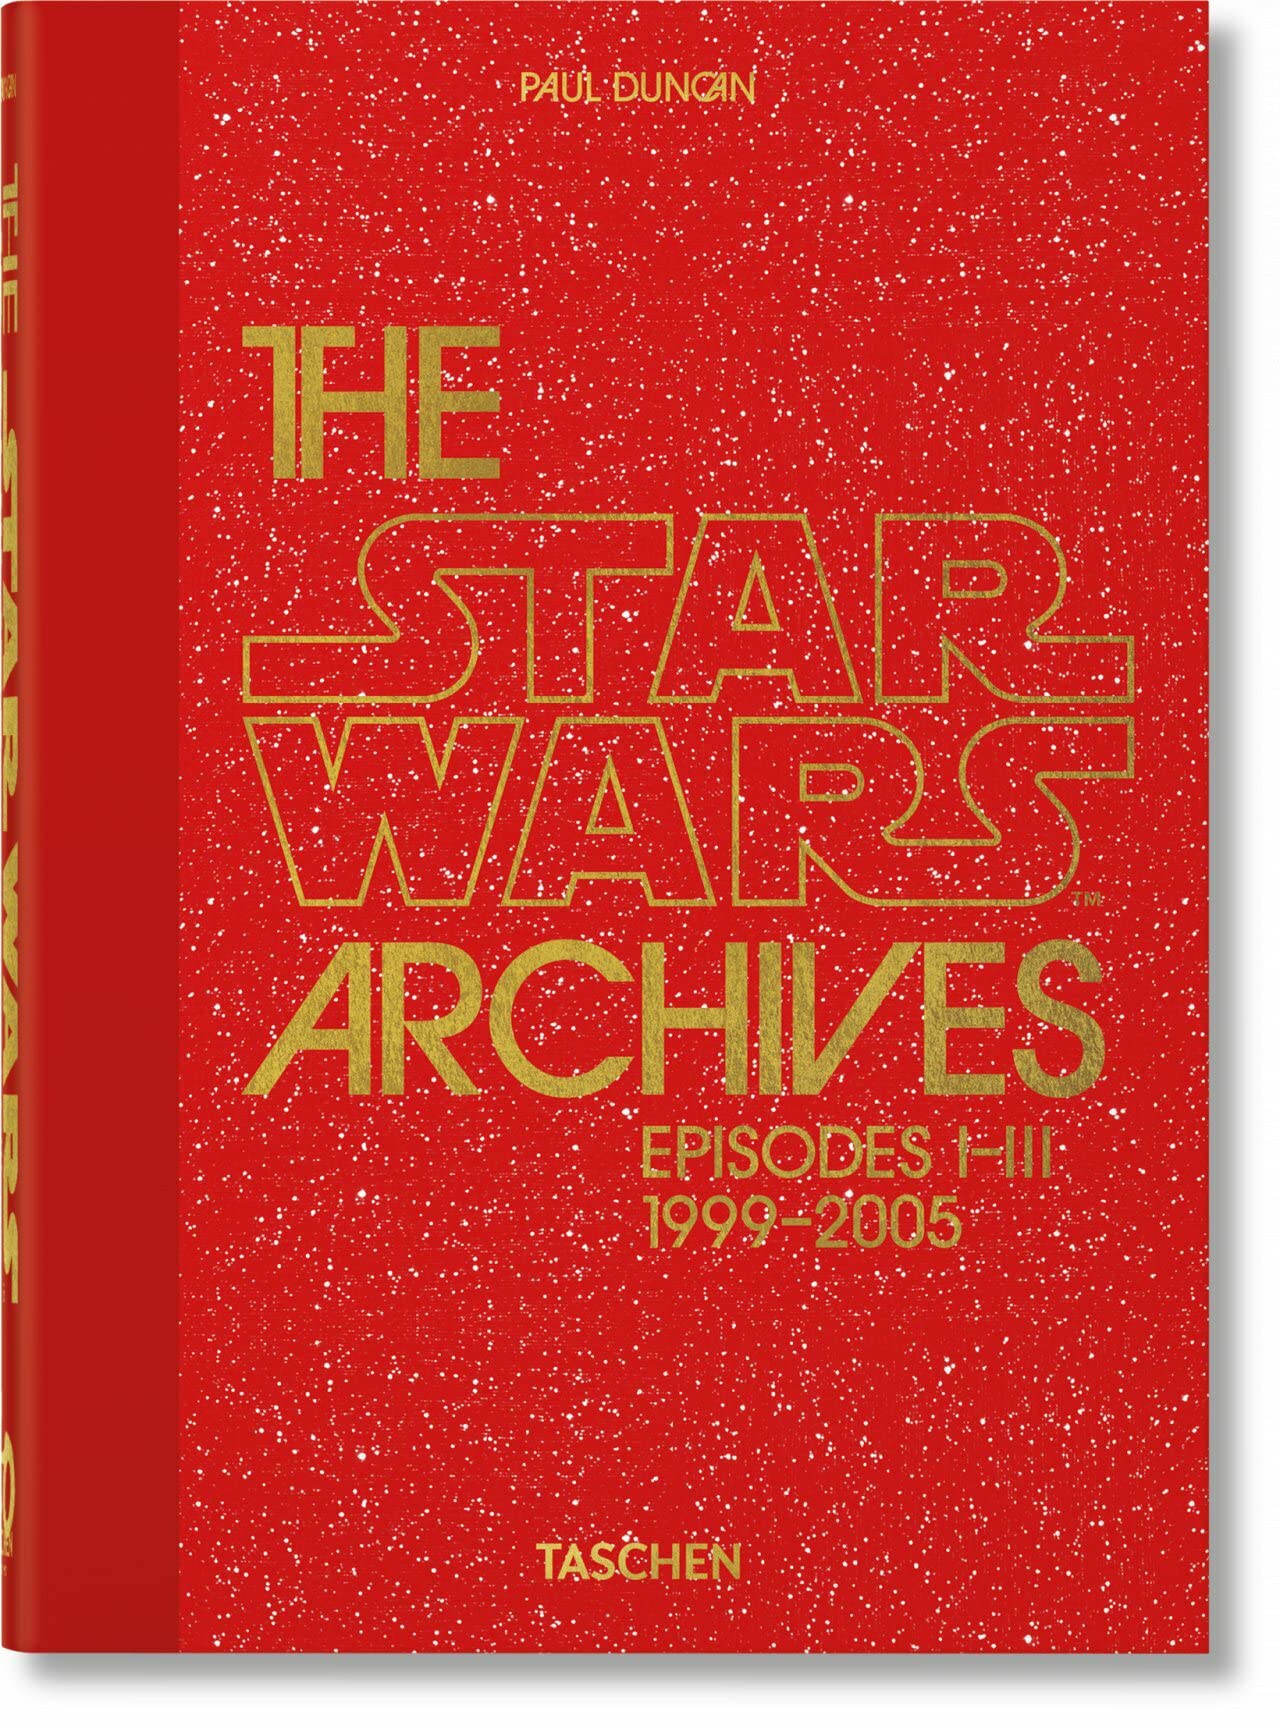 The Star Wars Archives. Episodes I-III 1999-2005 | Paul Duncan